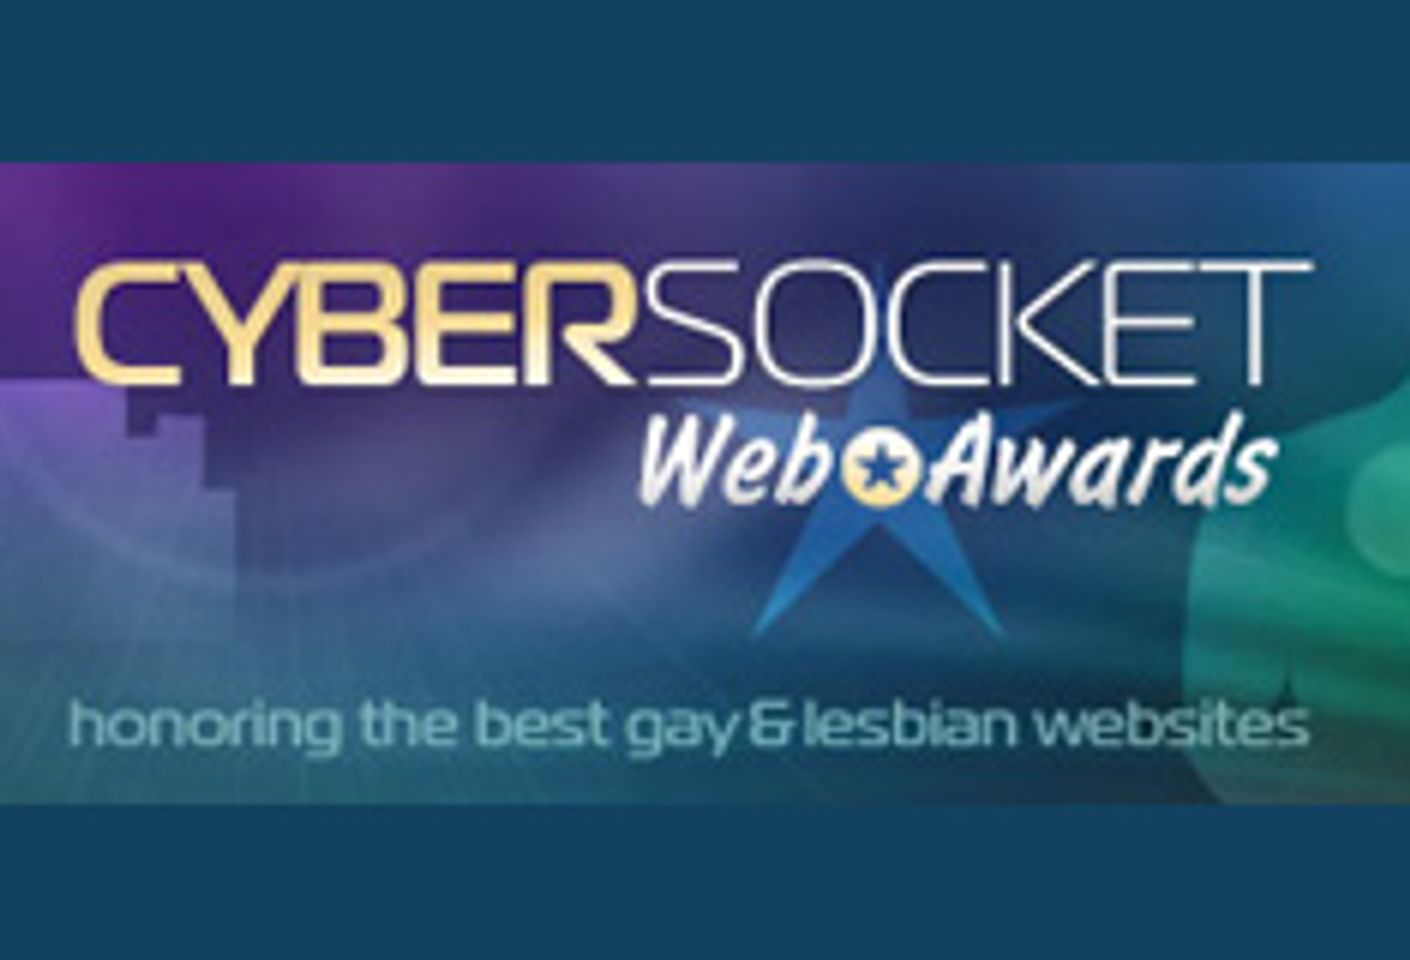 Voting Has Begun for the 13th Annual Cybersocket Web Awards